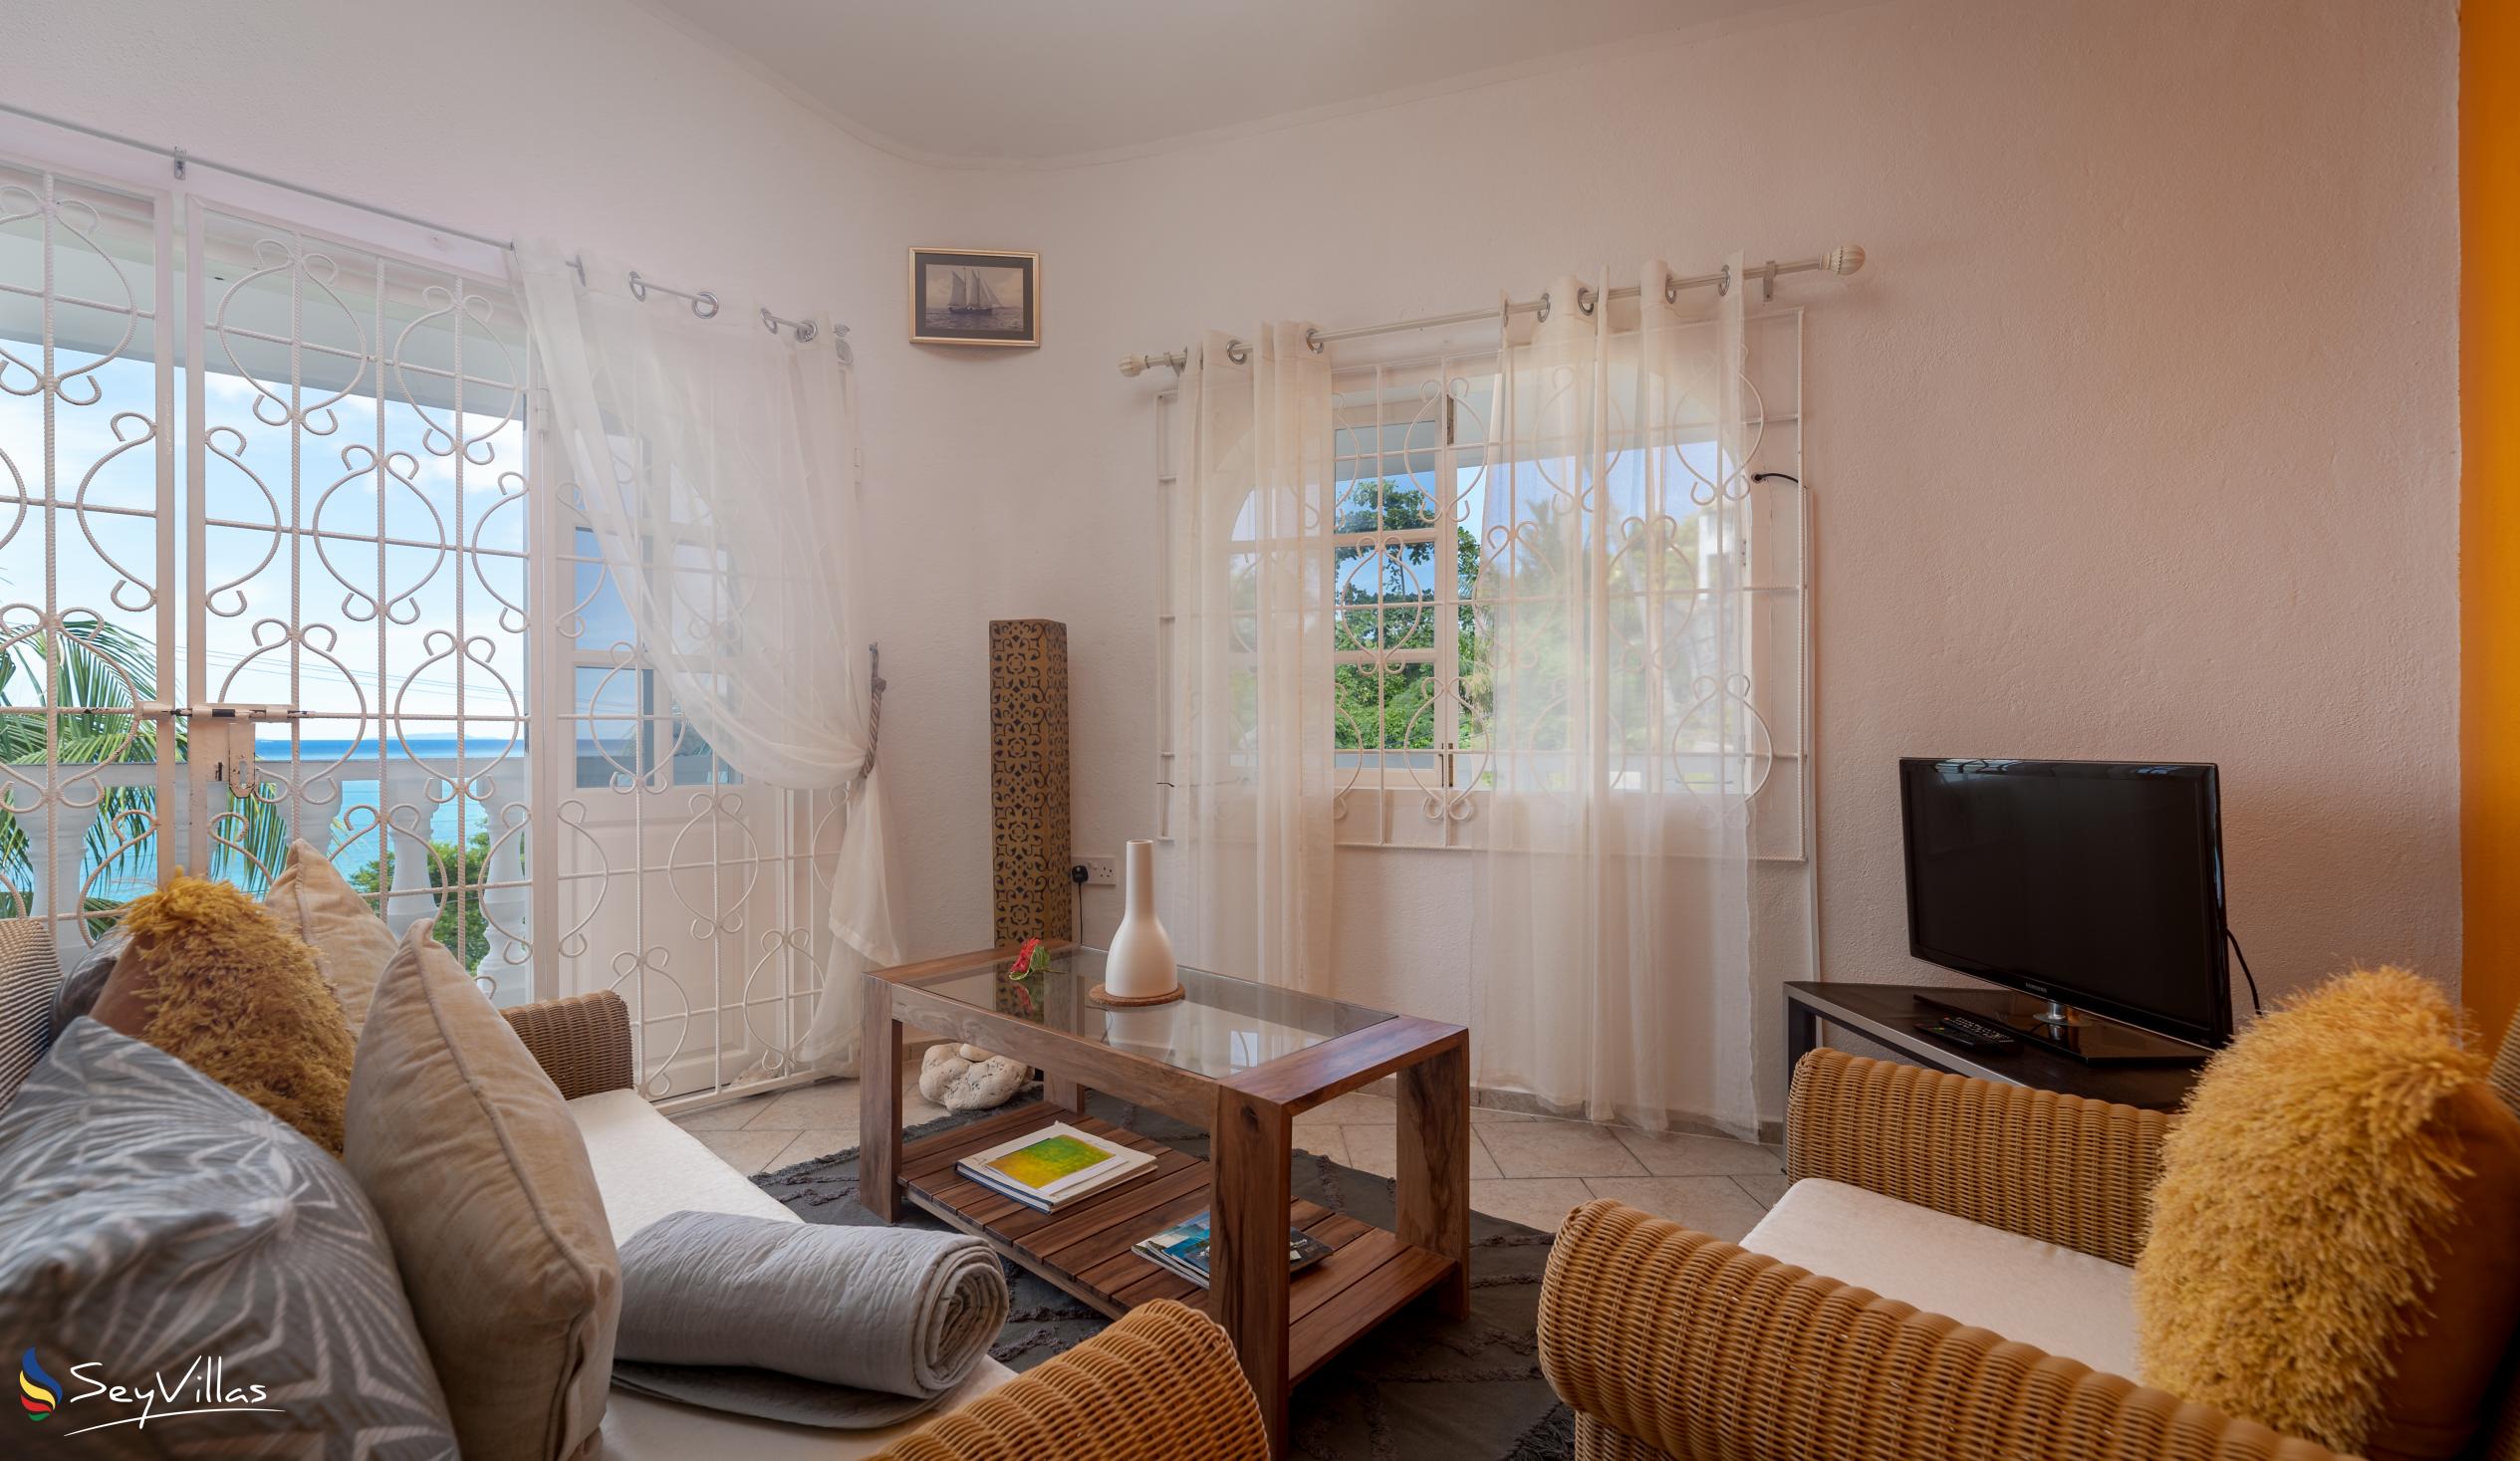 Photo 56: Epea Ocean View Self Catering - Dolphine Apartment - Mahé (Seychelles)